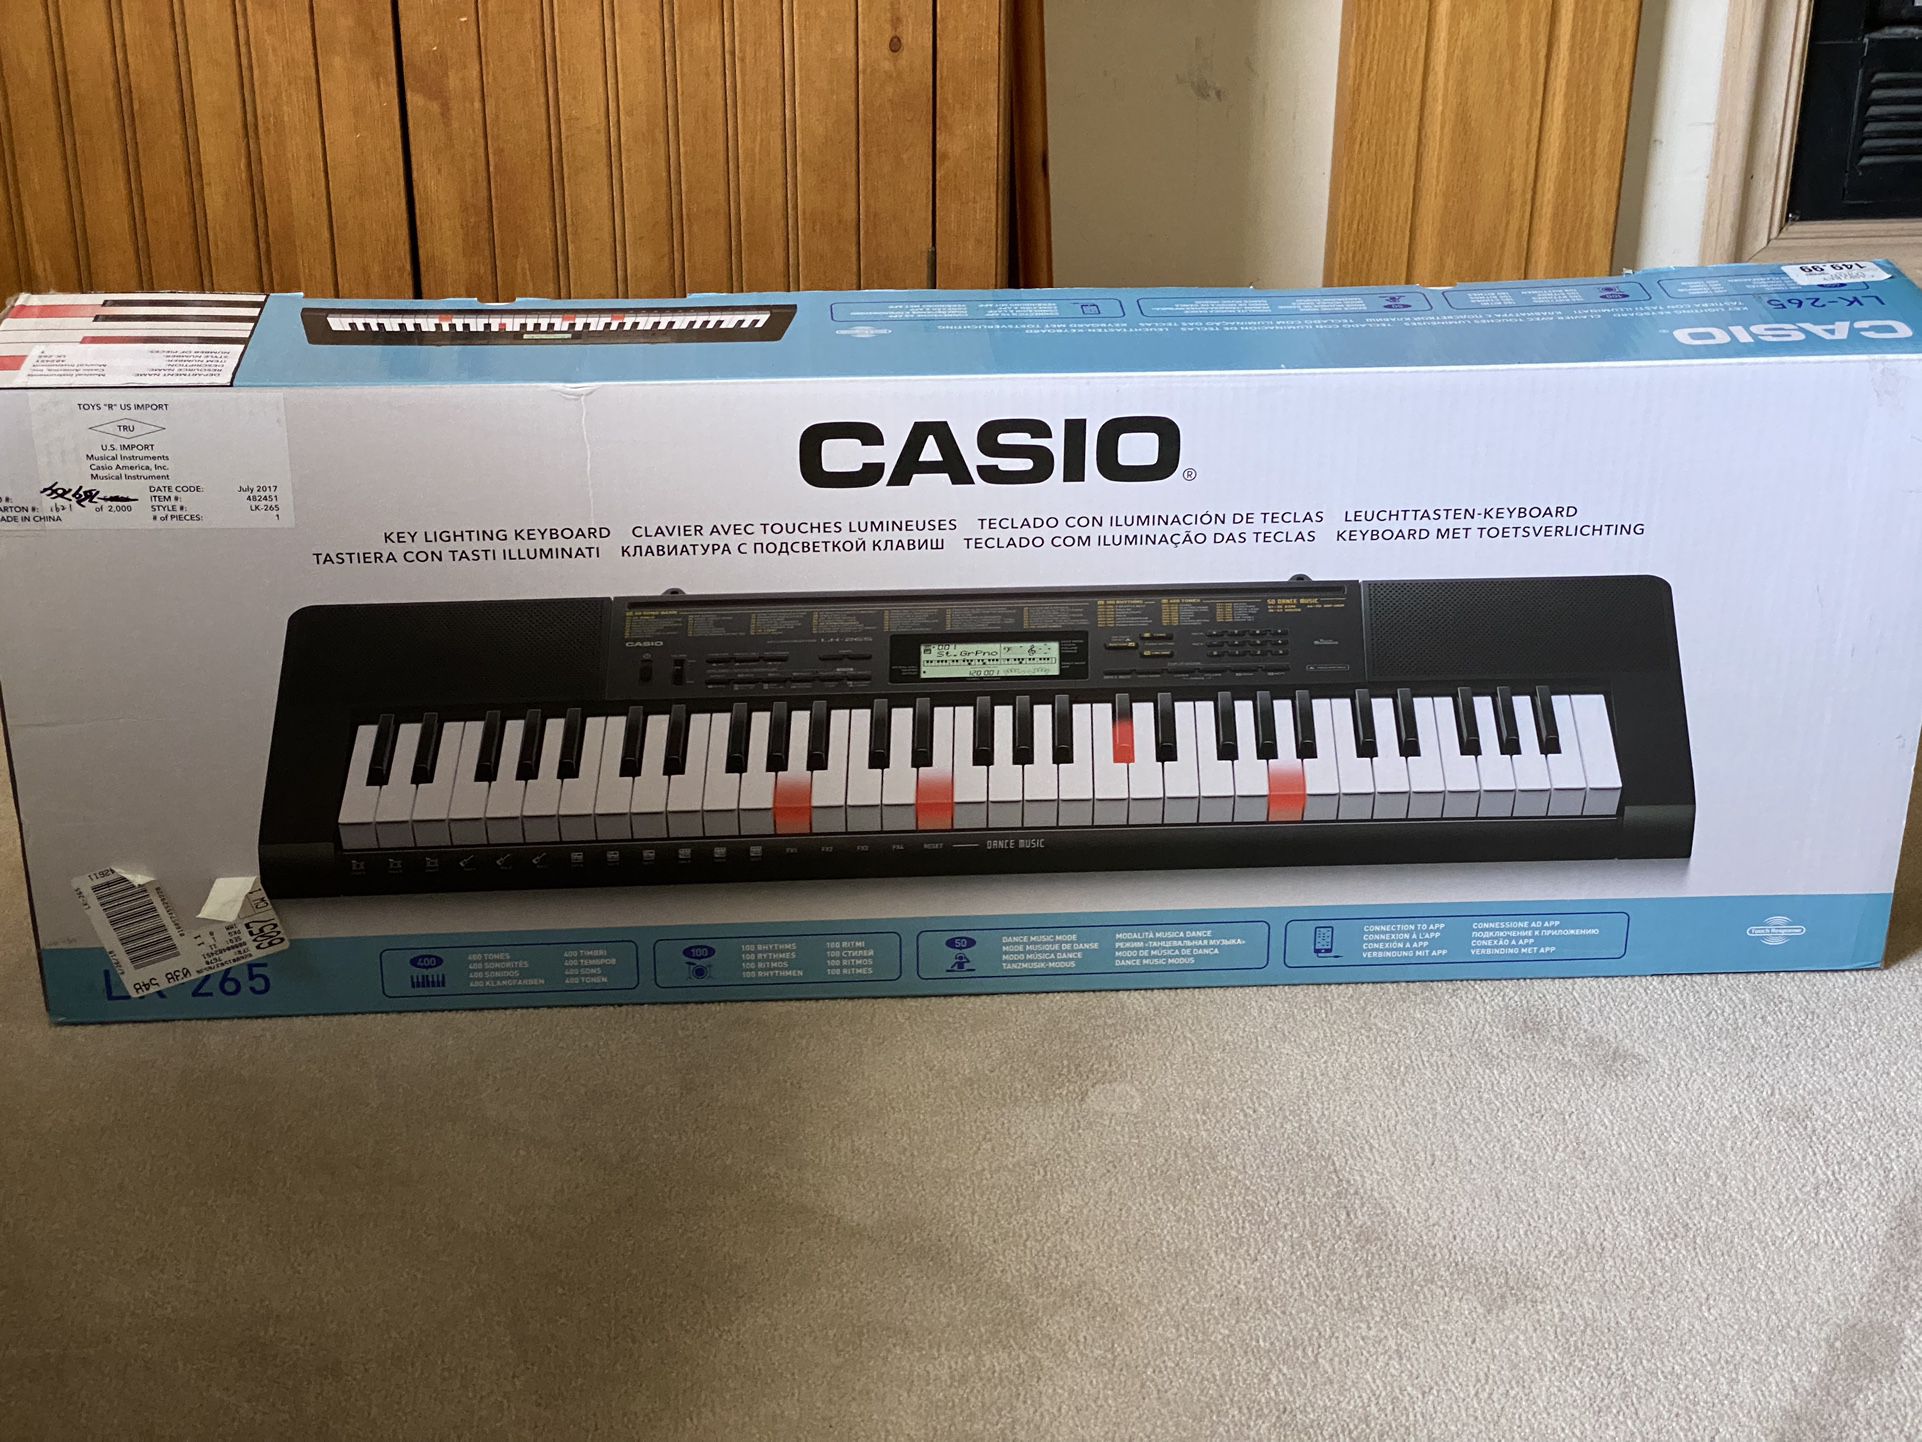 CASIO Lighting with Keyboard Stand Sale in Champaign, IL - OfferUp